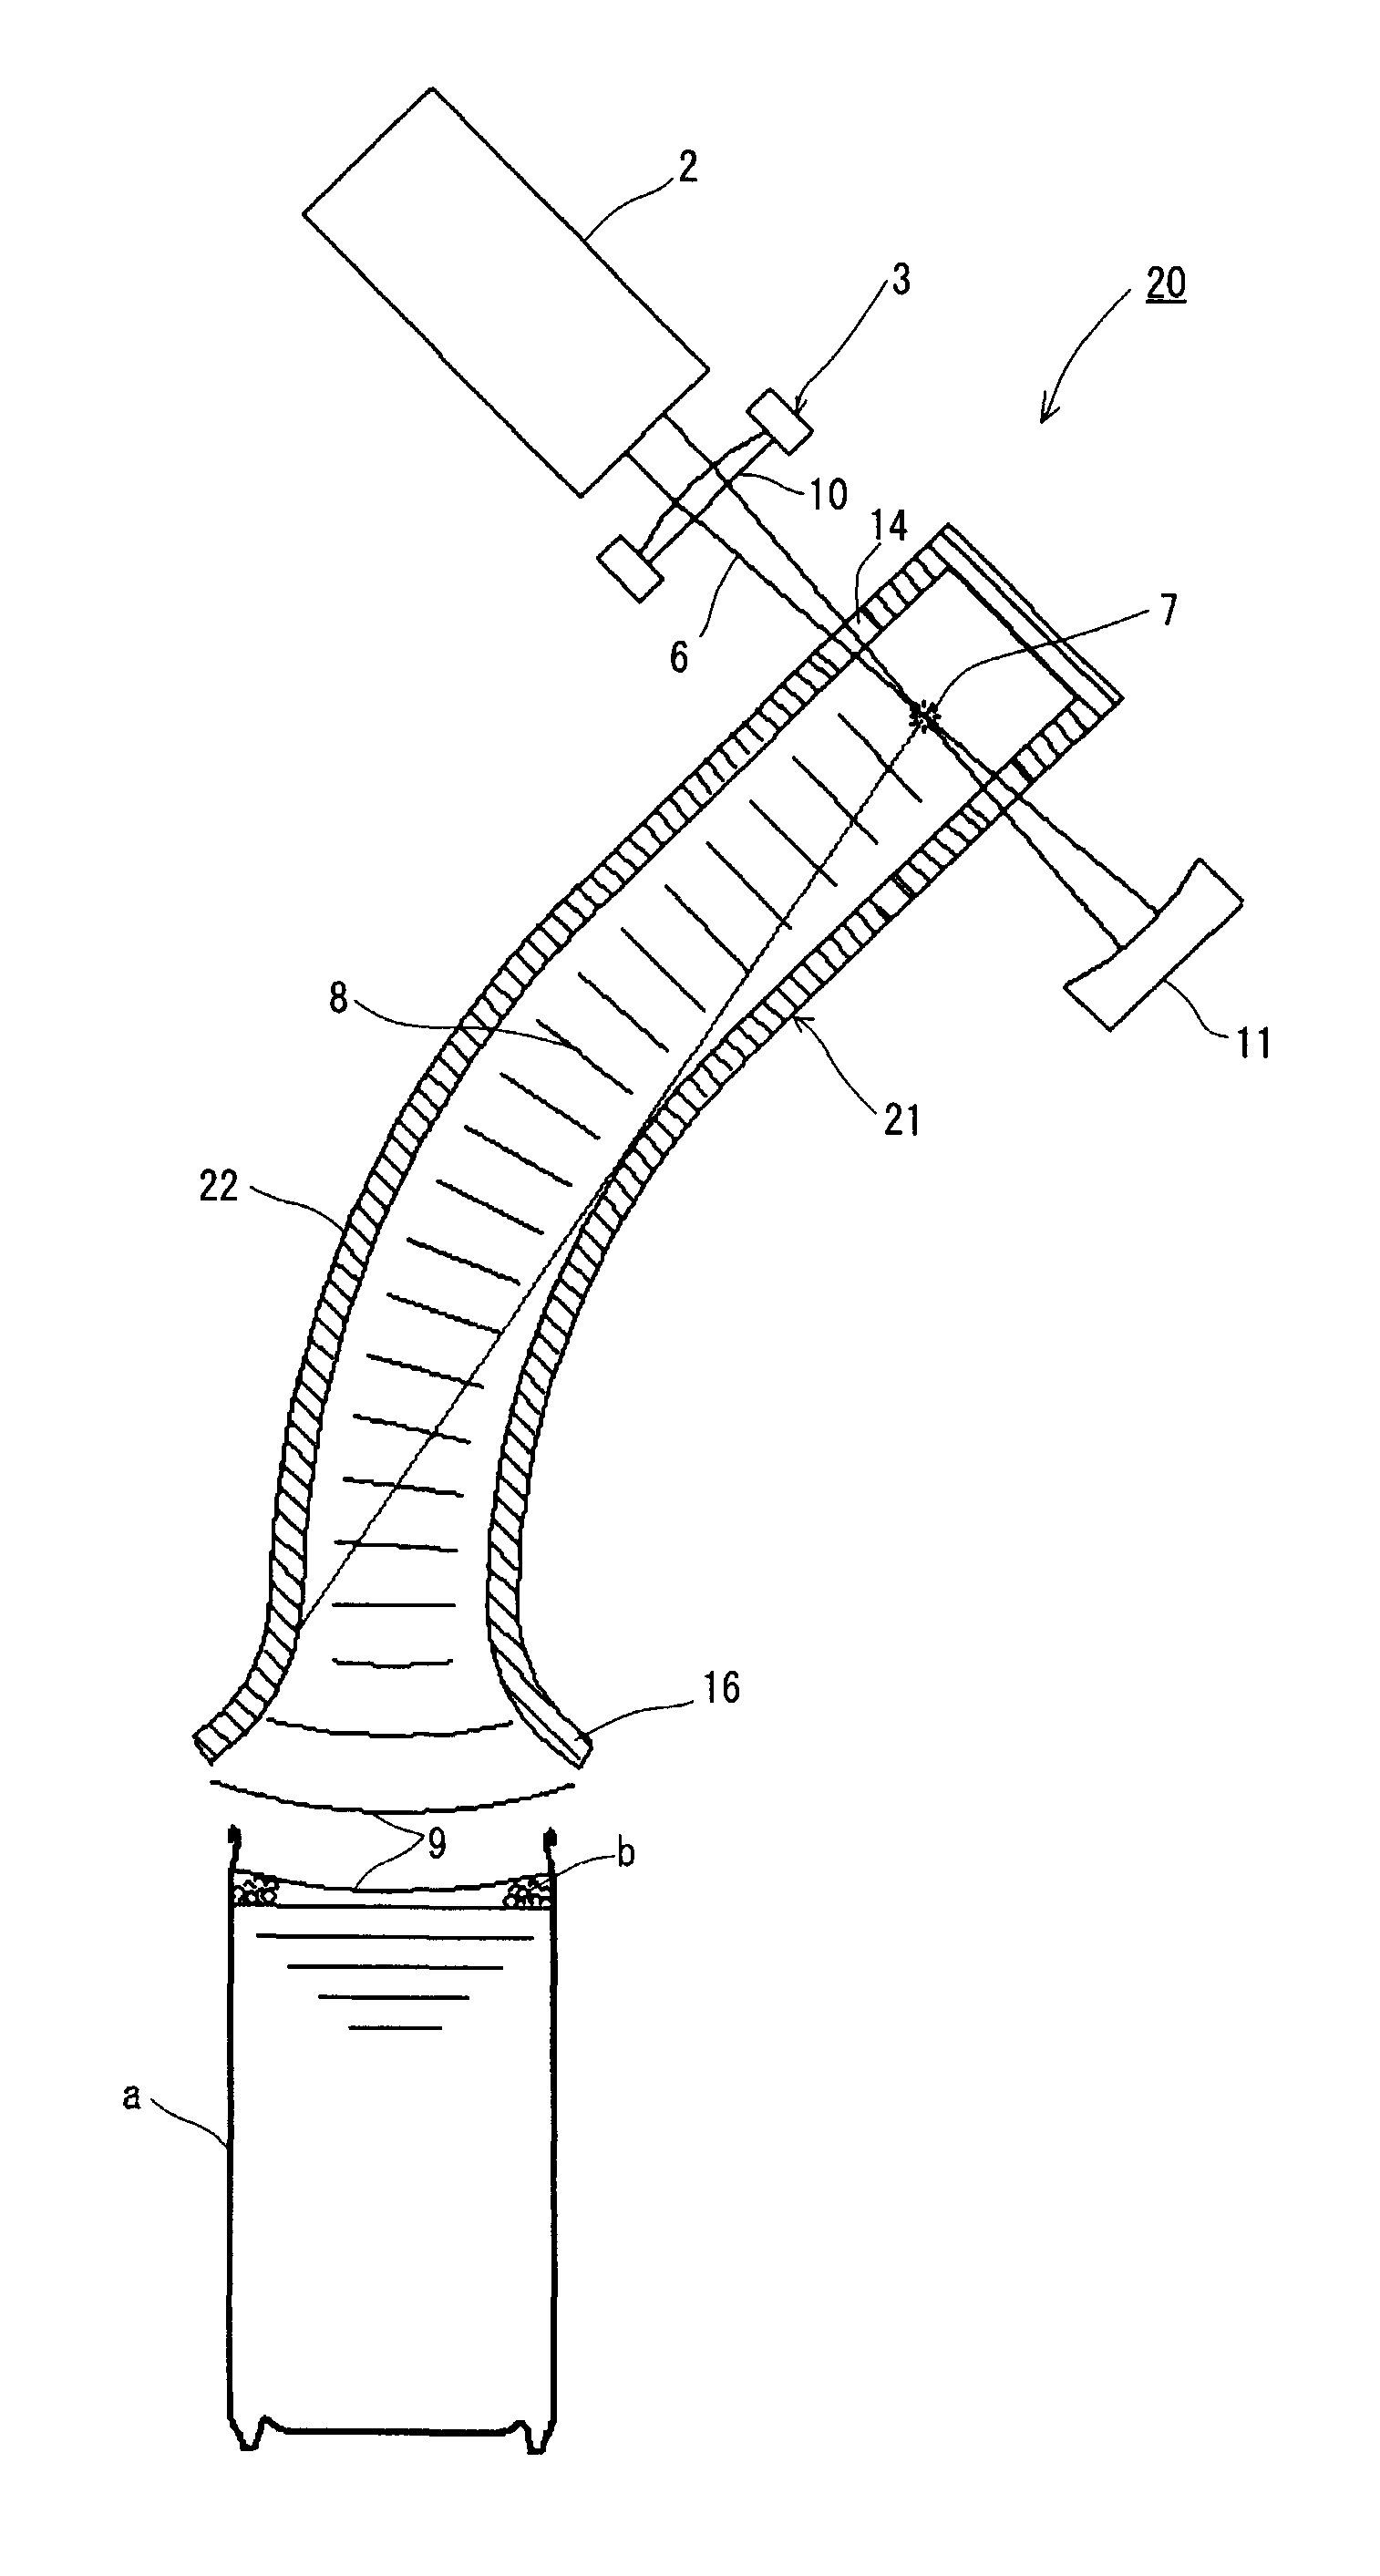 Defoaming method and device